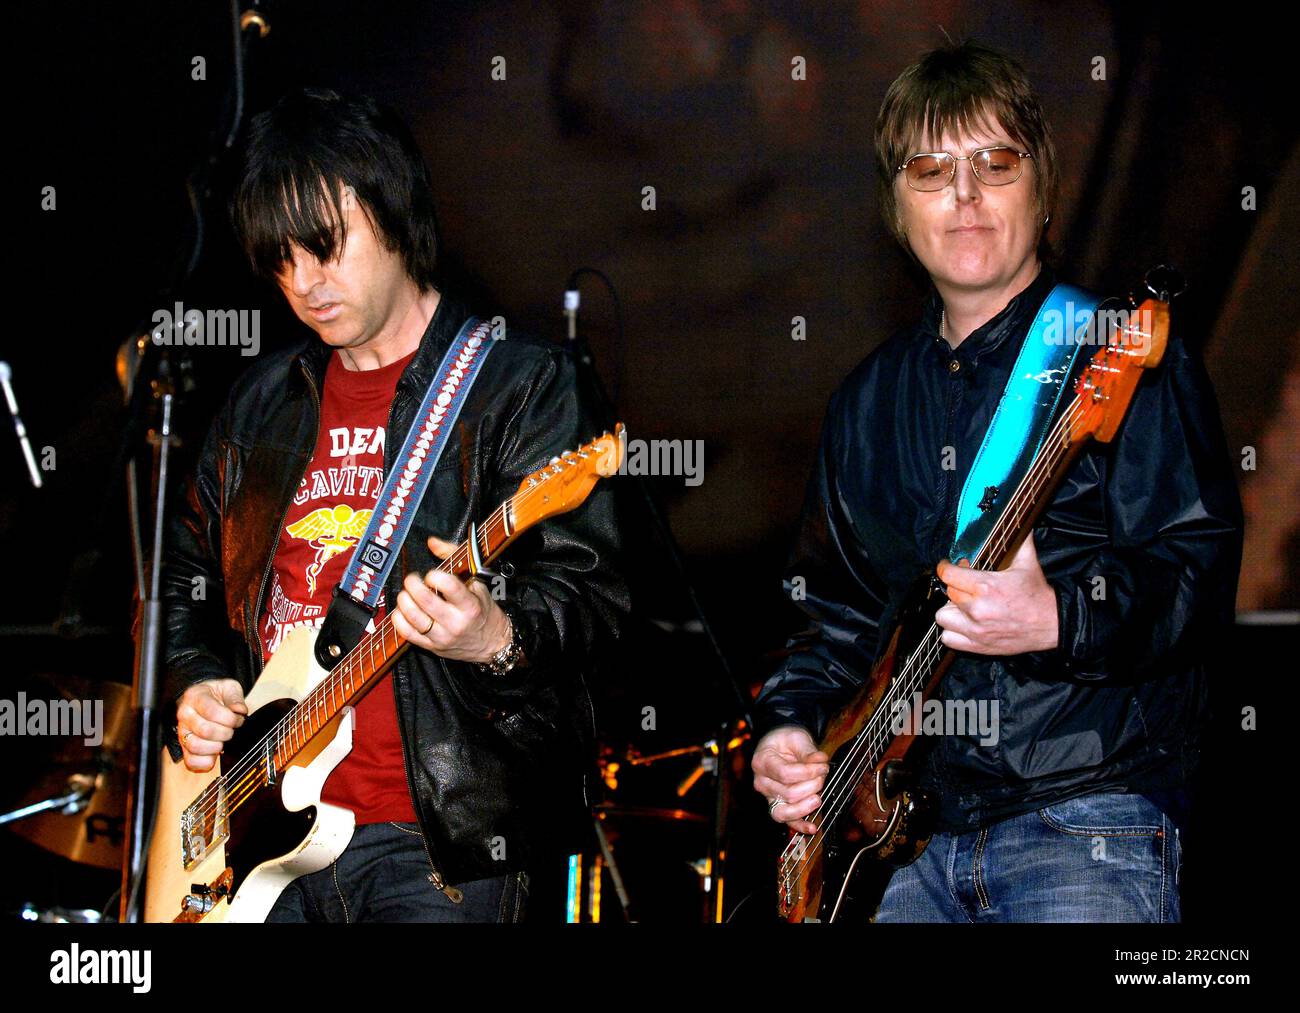 File photo dated 28/01/06 of former members of The Smiths, Andy Rourke (right) and Johnny Marr, on stage during the 'Manchester Versus Cancer' charity concert, held at the Manchester Evening News (M.E.N.) Arena in Manchester. Mr Rourke has died aged 59 after a 'lengthy illness with pancreatic cancer', his former bandmate Mr Marr has said. Issue date: Friday May 19, 2023. Stock Photo